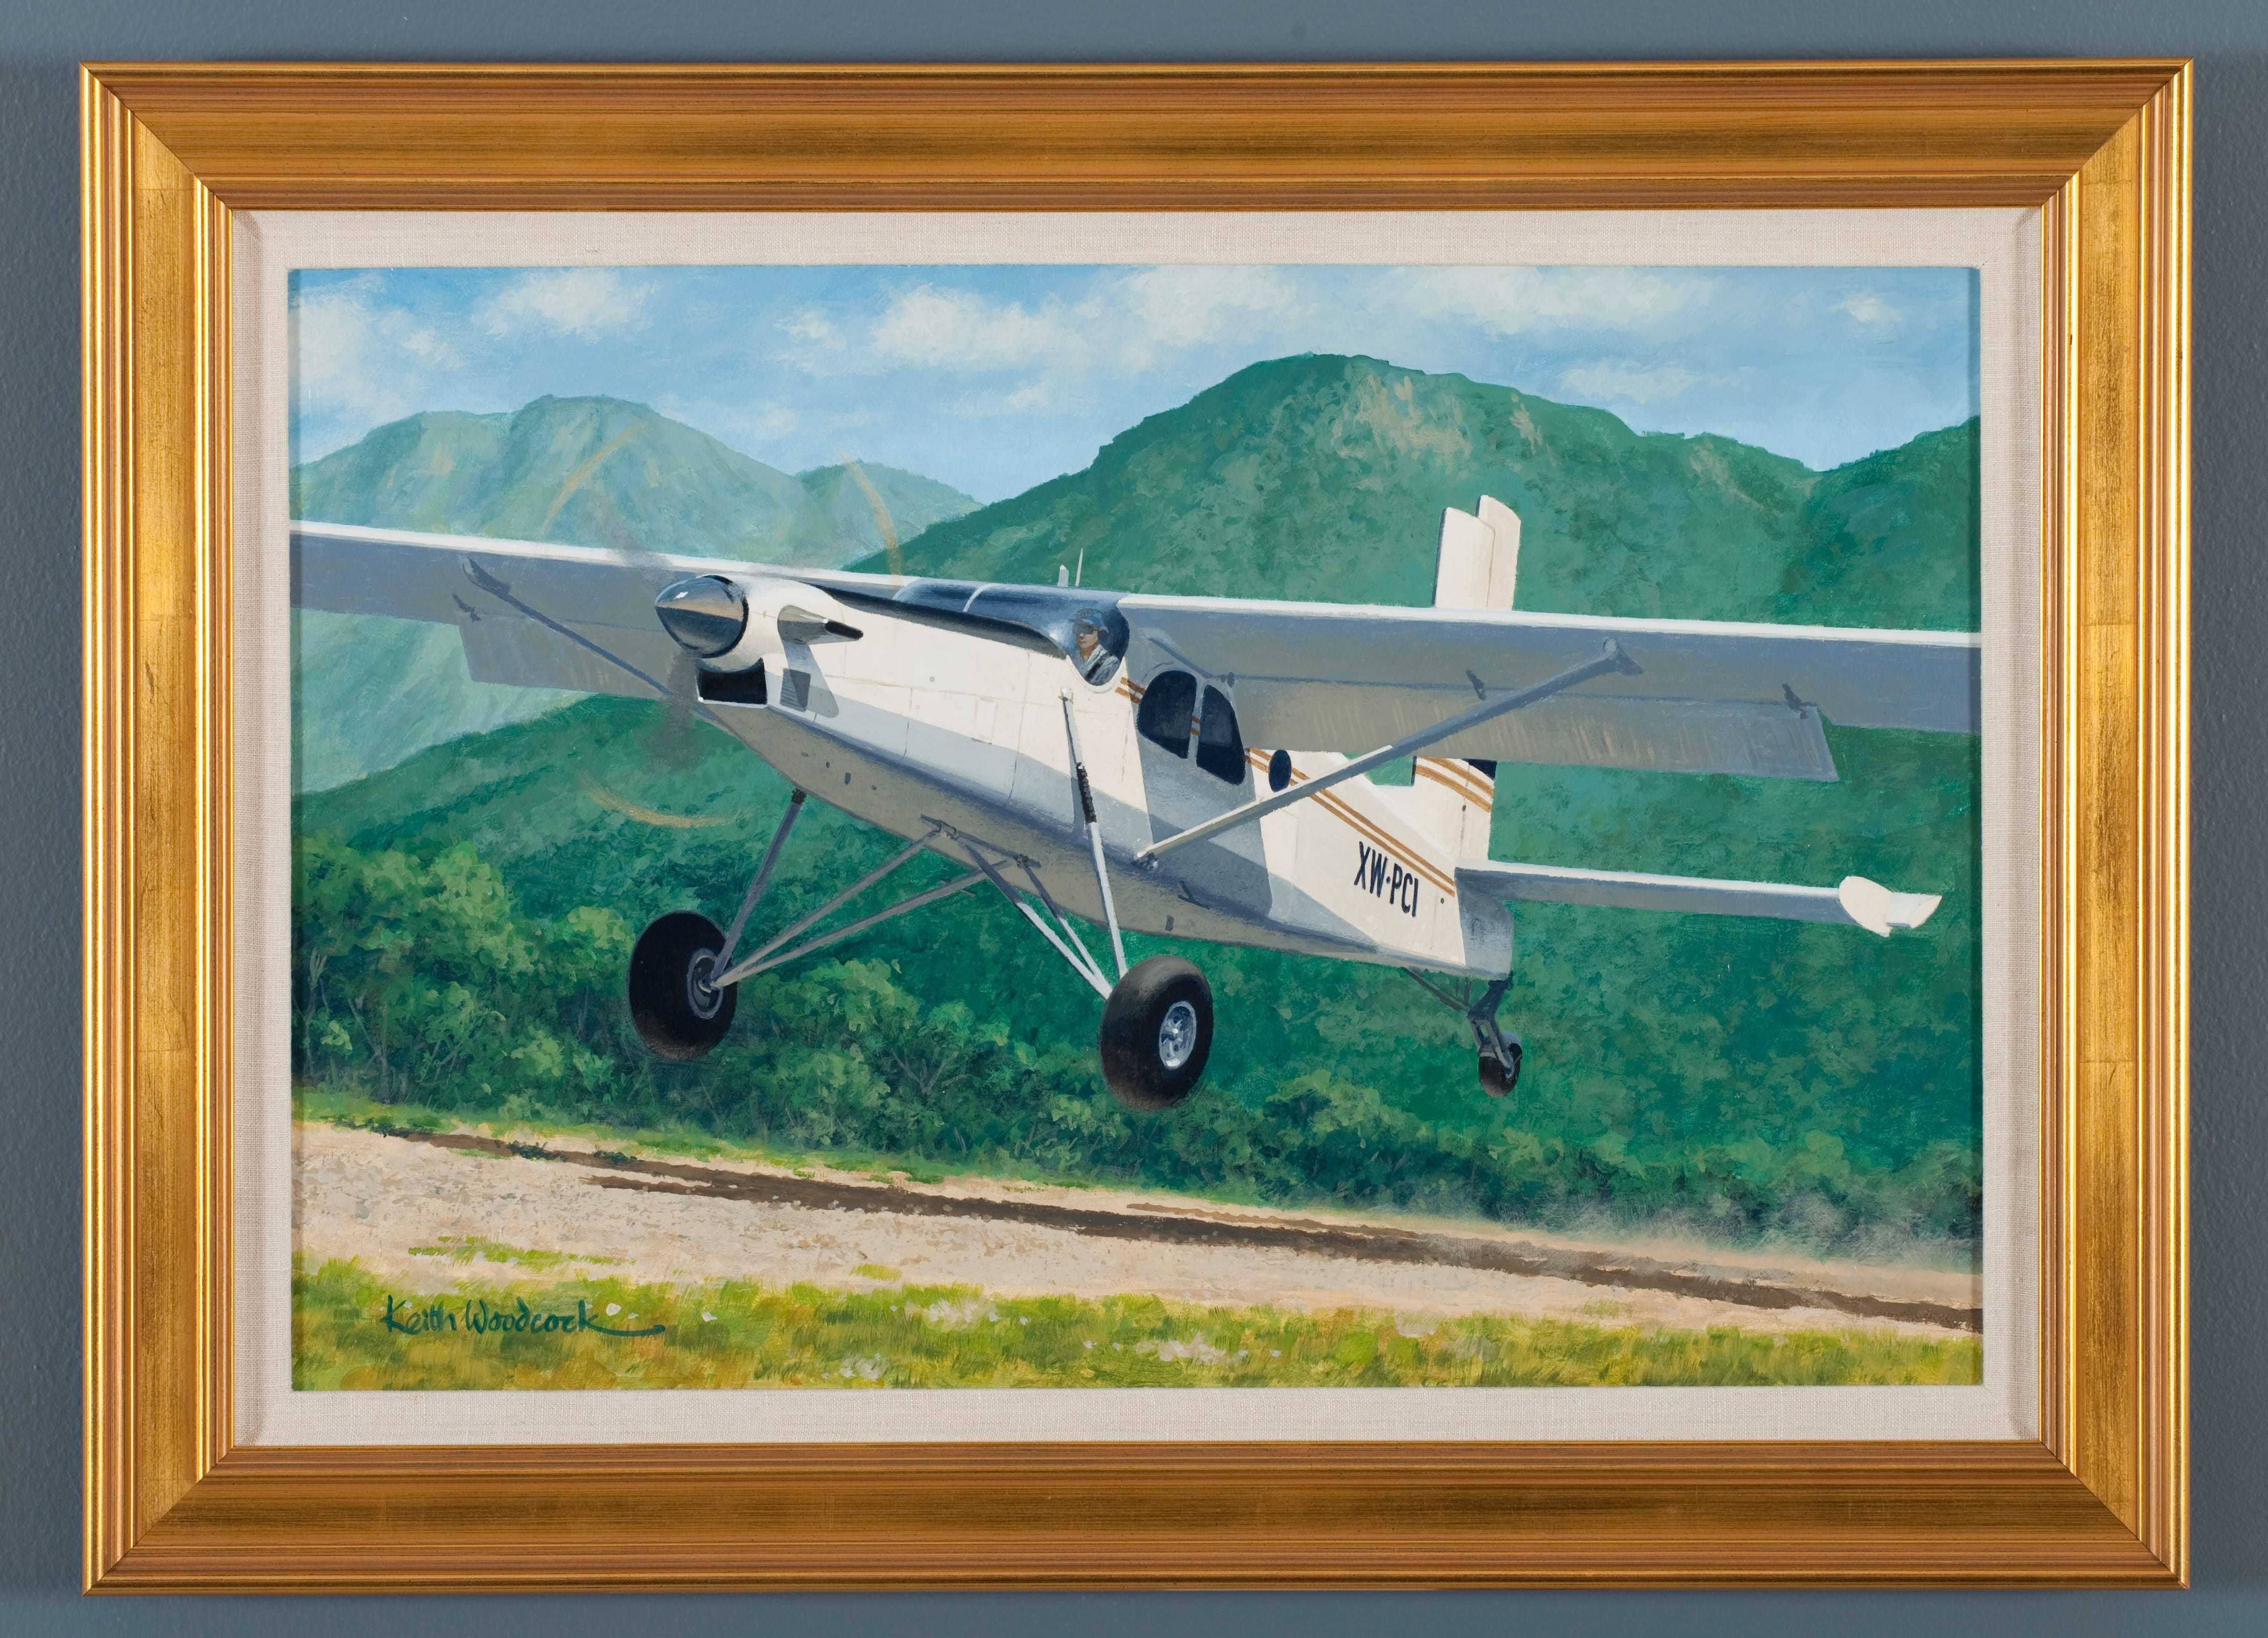 A painting of the Pilatus PC-6, a small plane with a front propeller